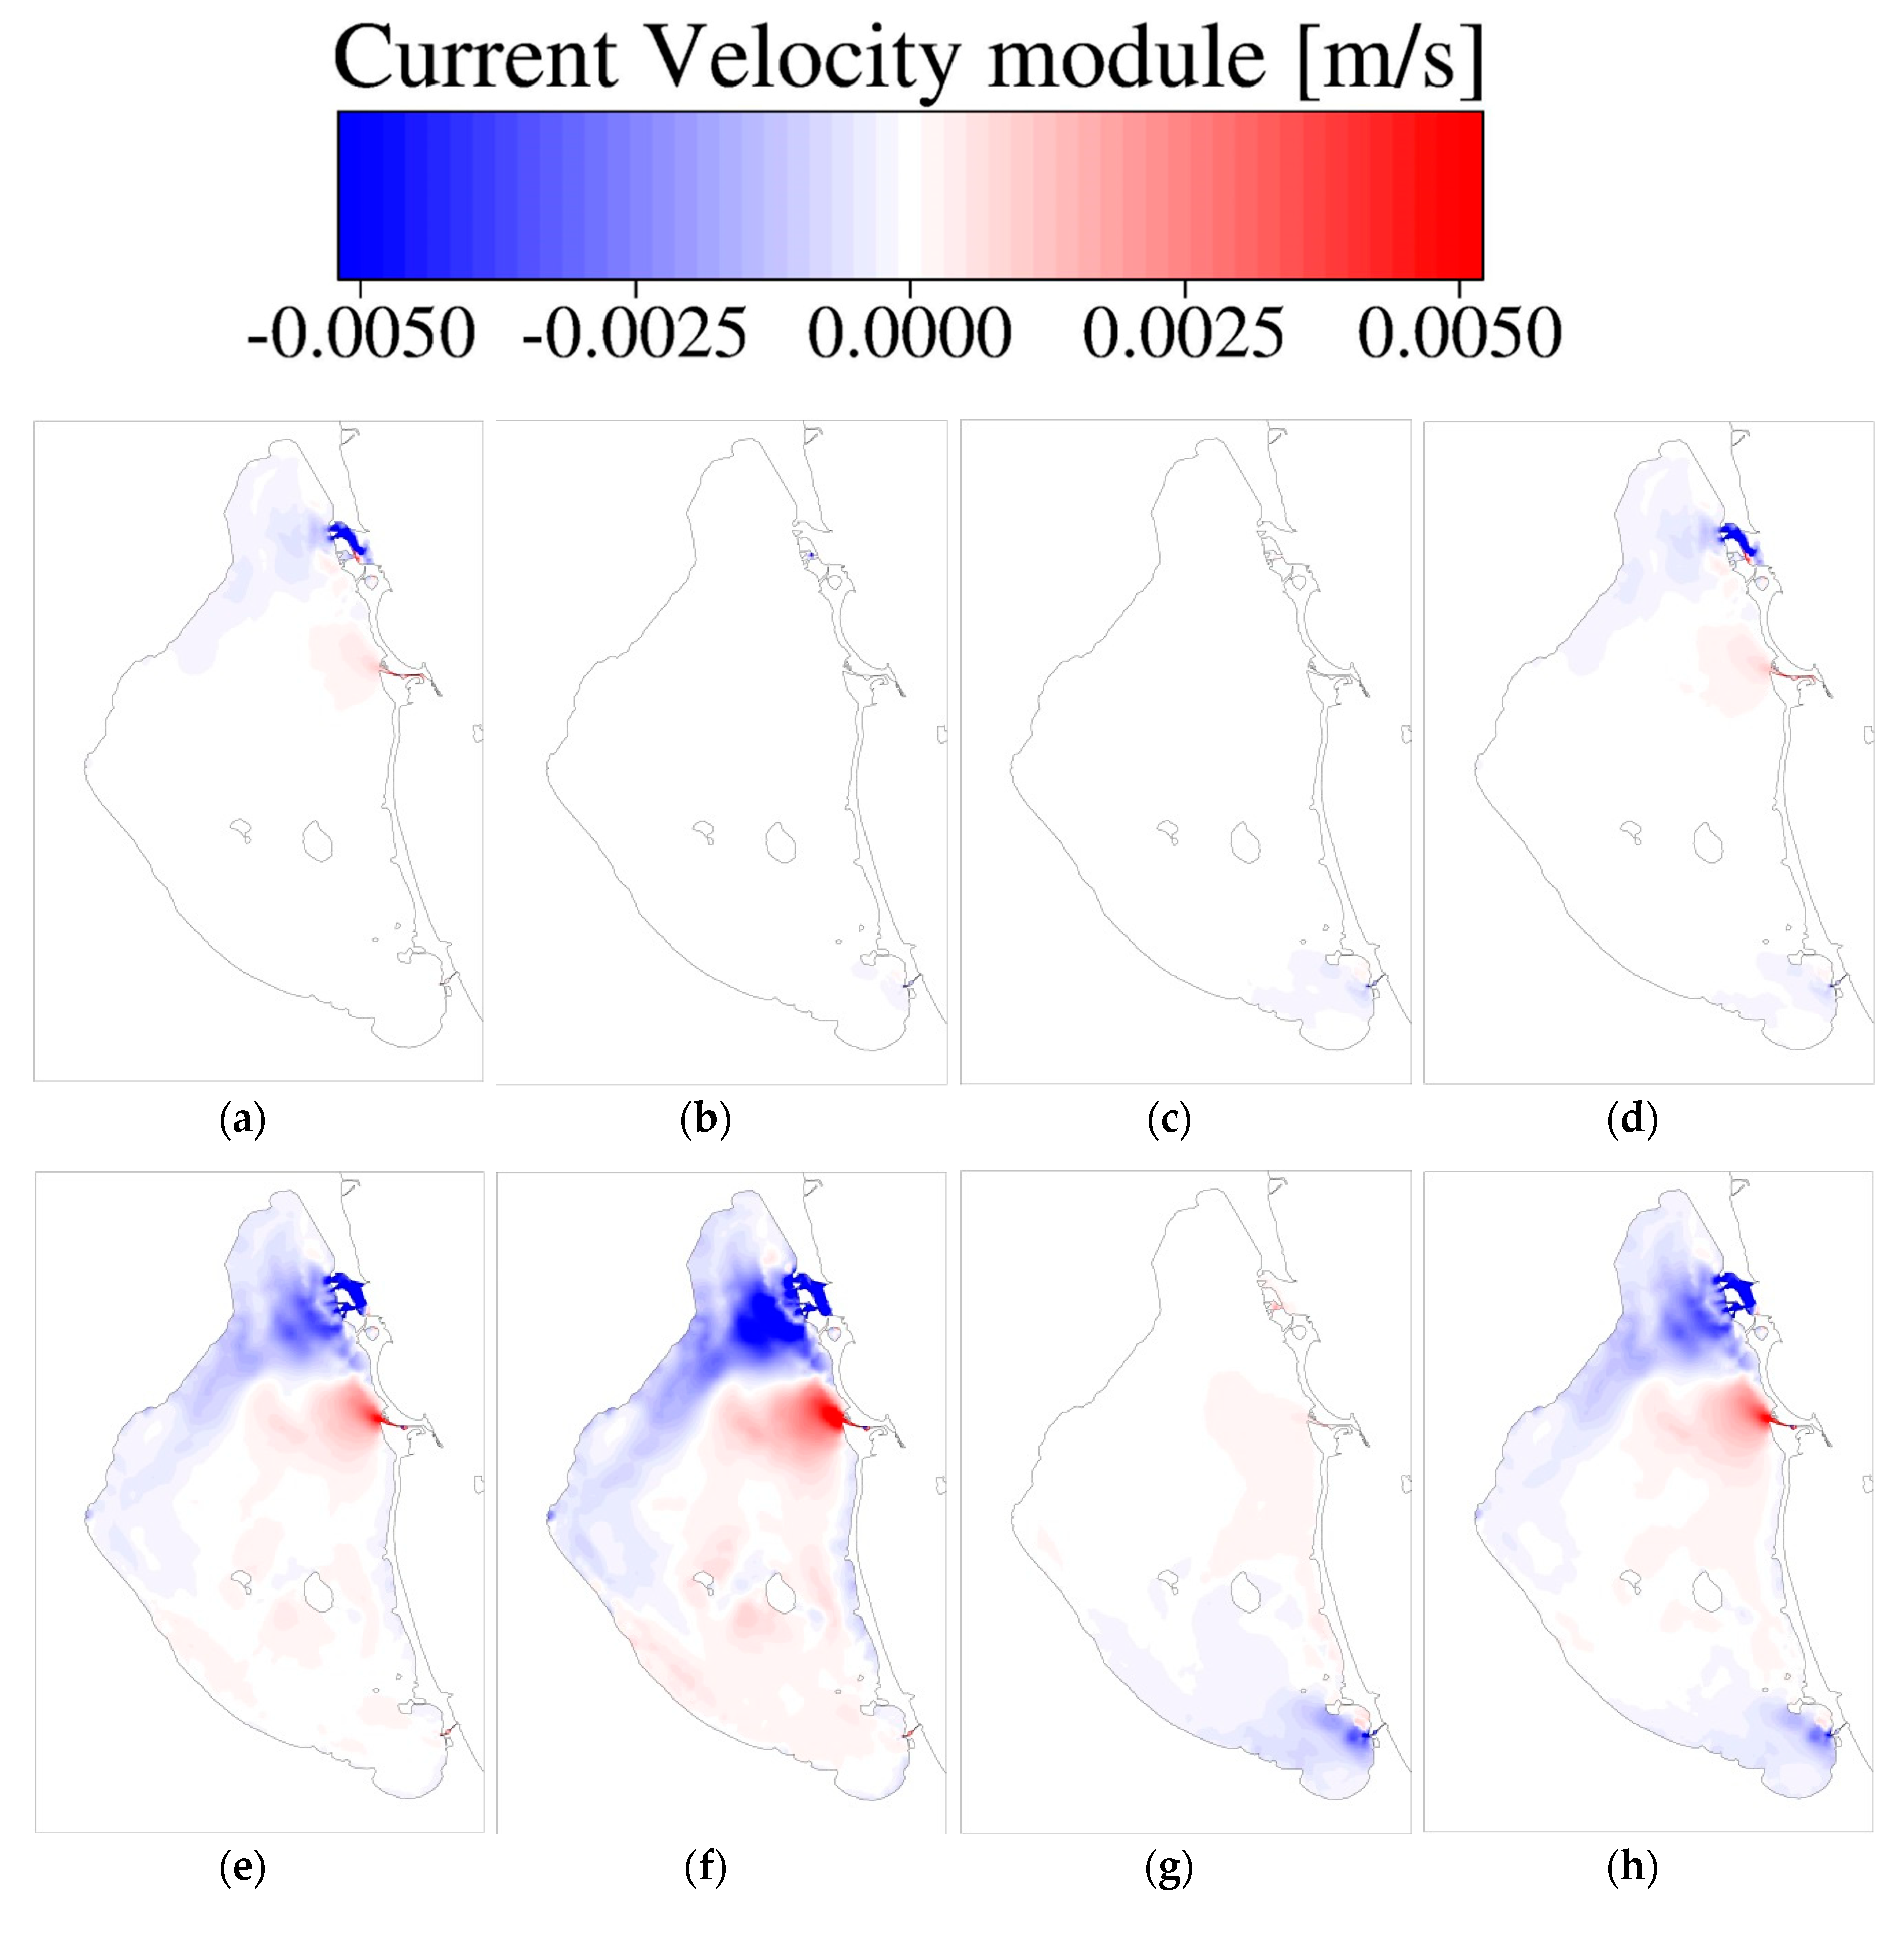 Water Free Full Text Assessing The Hydrodynamic Response Of The Mar Menor Lagoon To Dredging Inlets Interventions Through Numerical Modelling Html